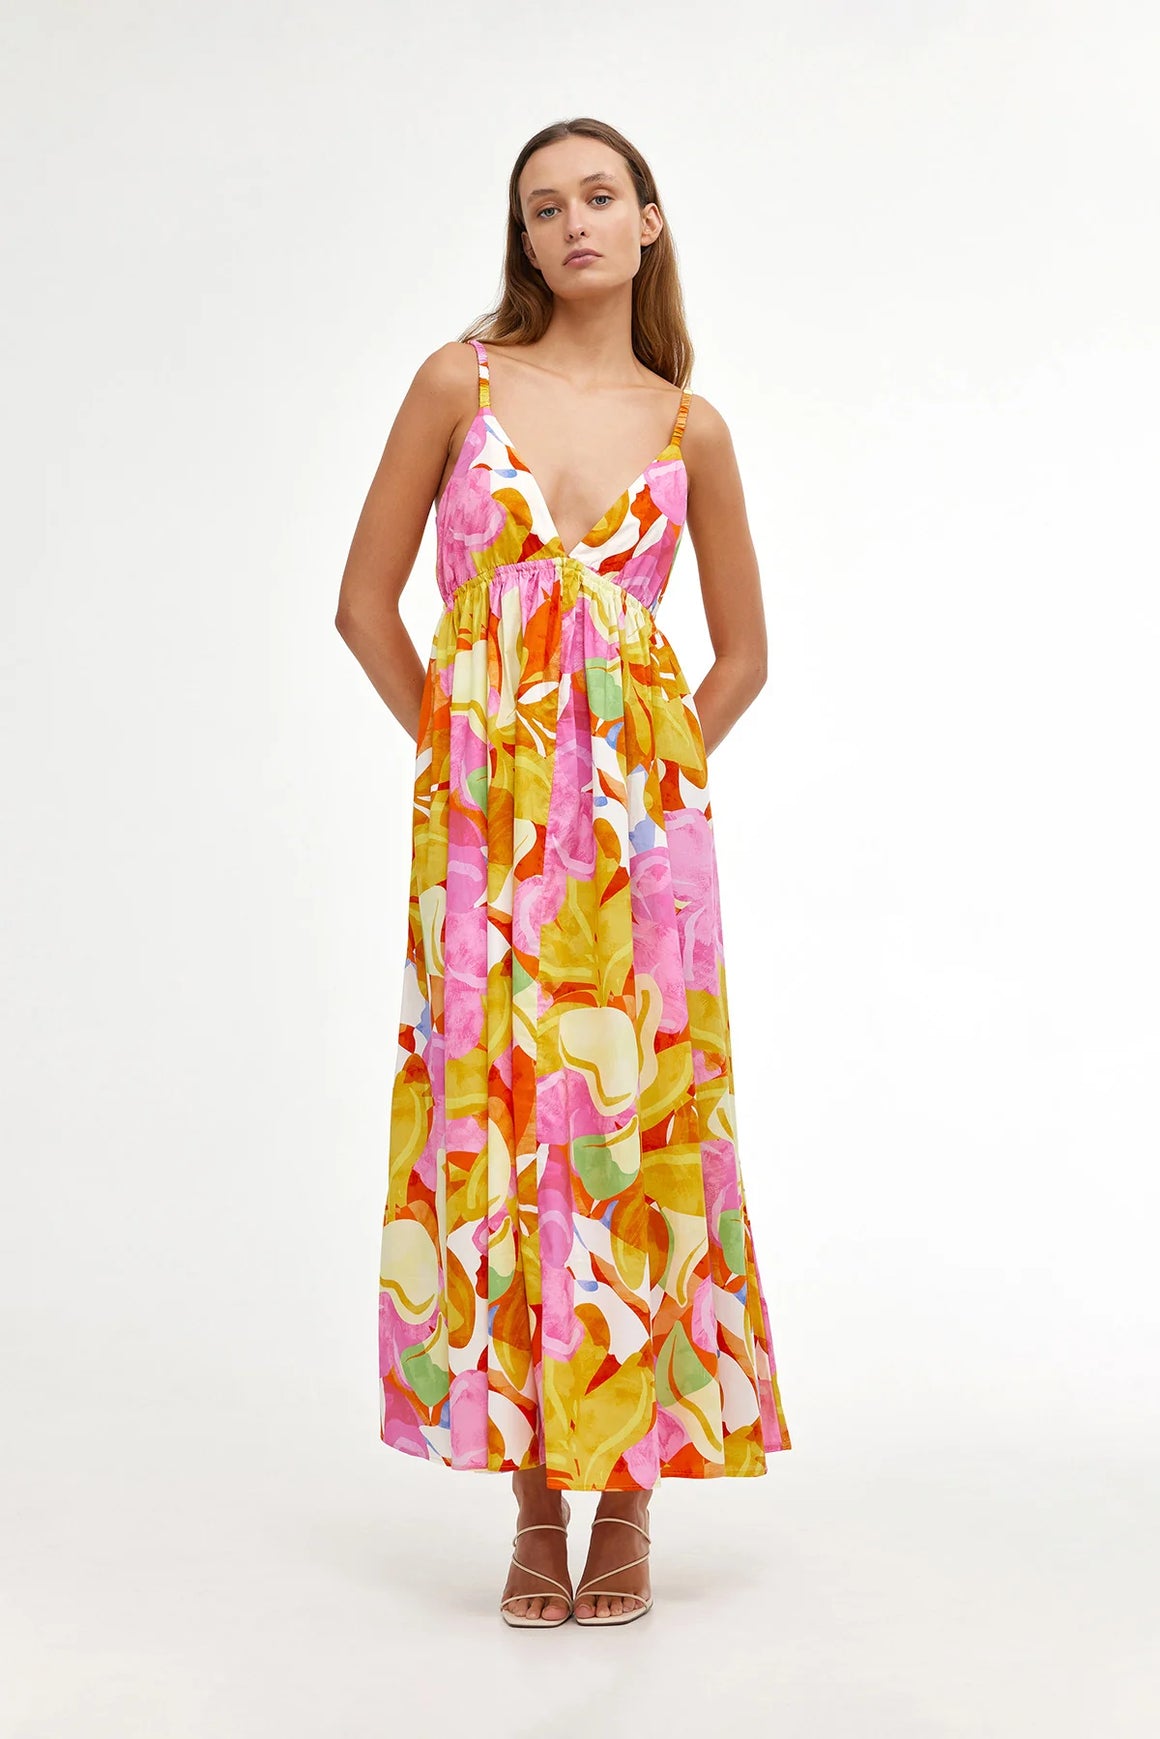 Maxi dress with thin shoulder straps and pink yellow orange floral pattern all over